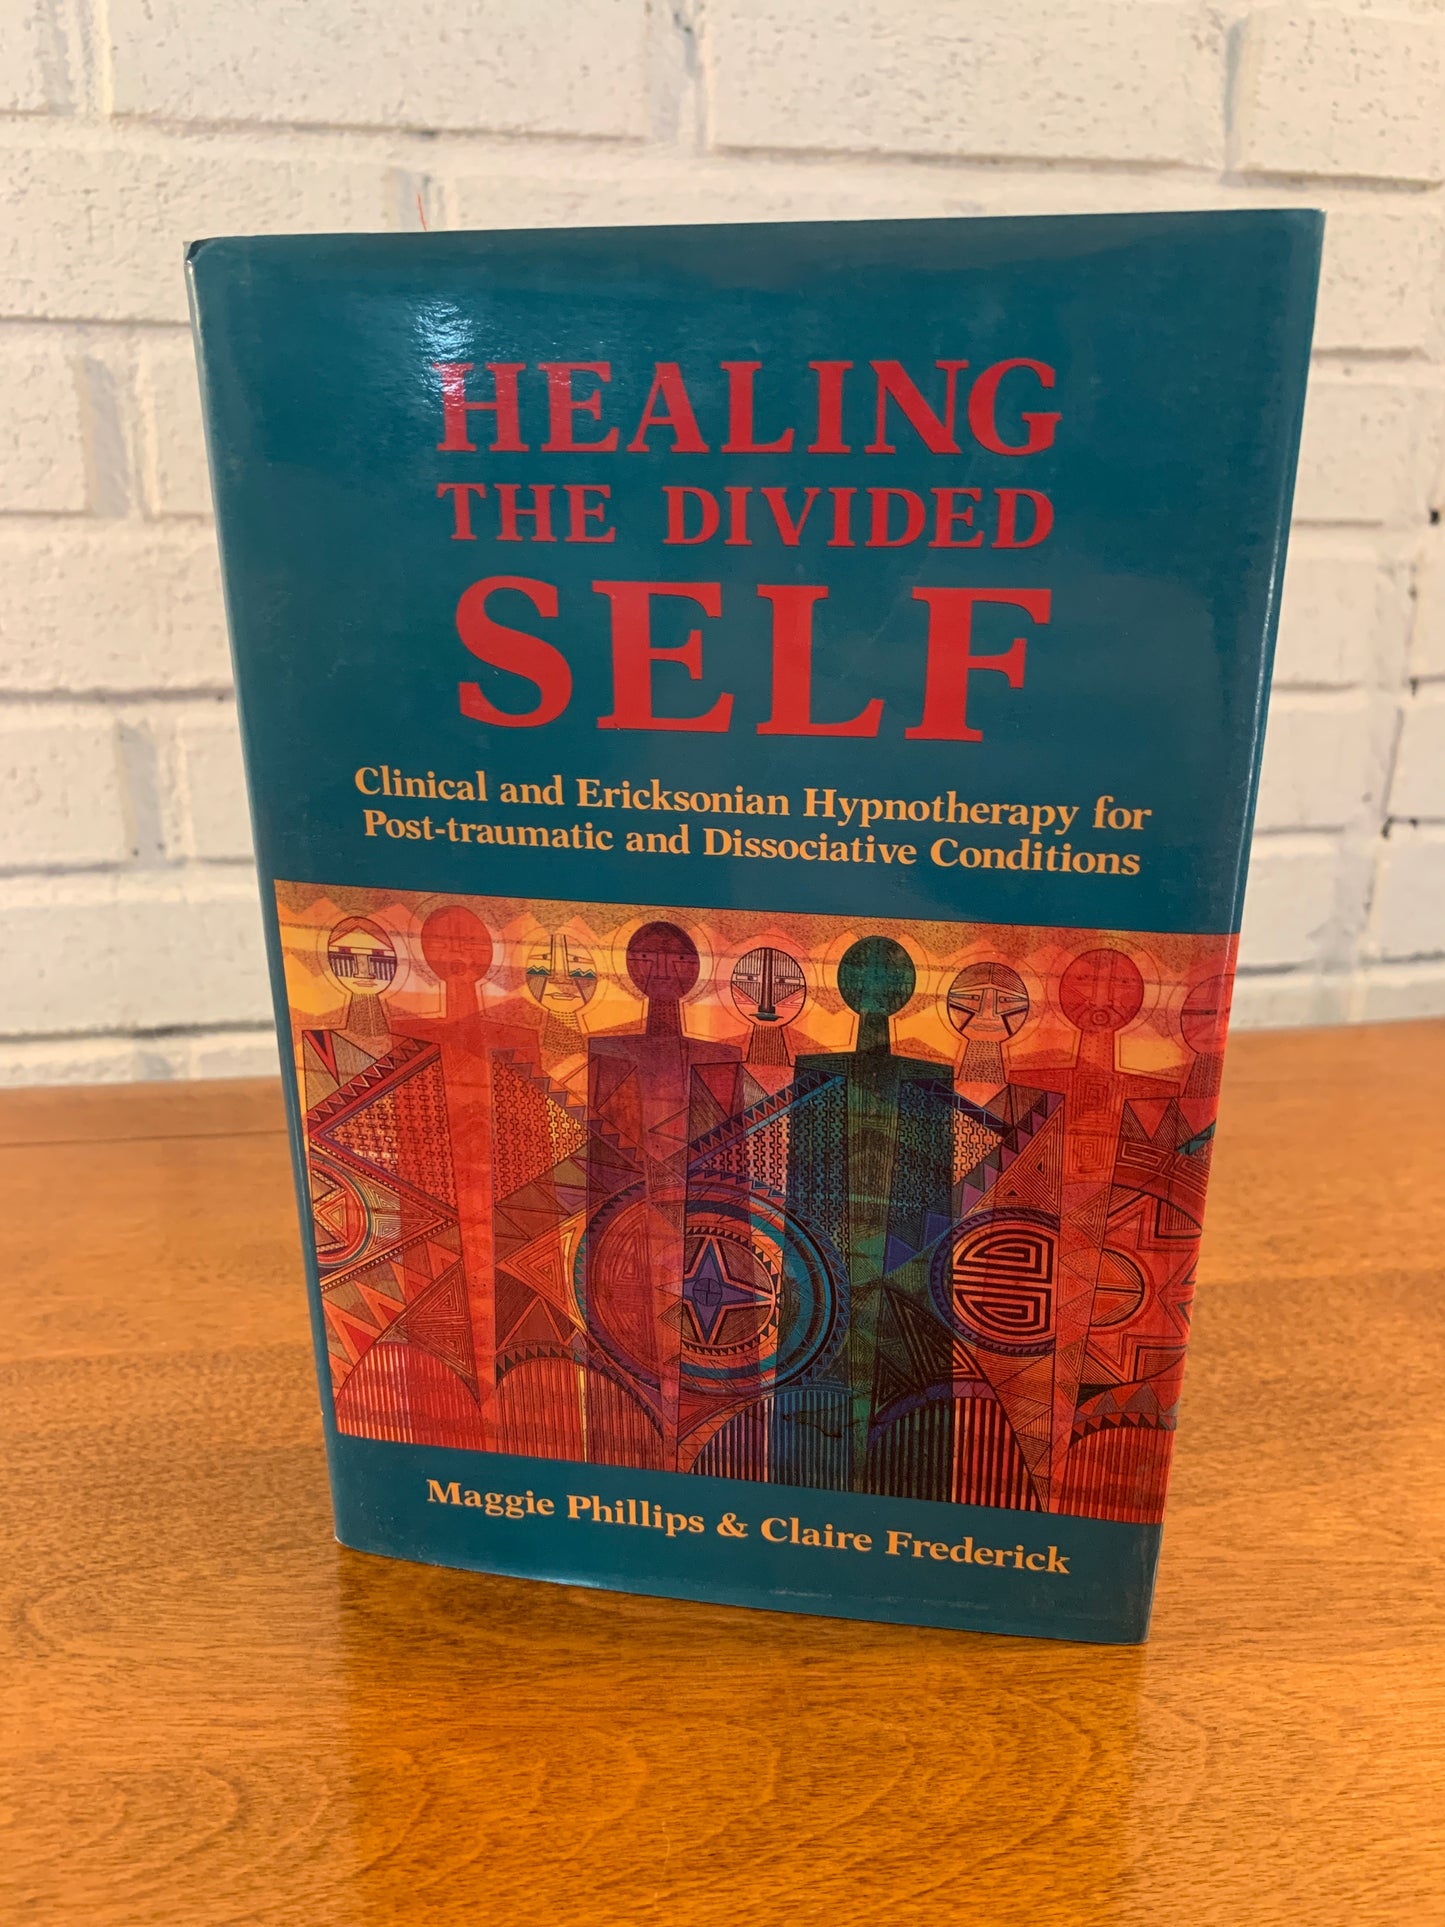 Healing the Divided Self by Maggie Phillips & Claire Frederick 1995